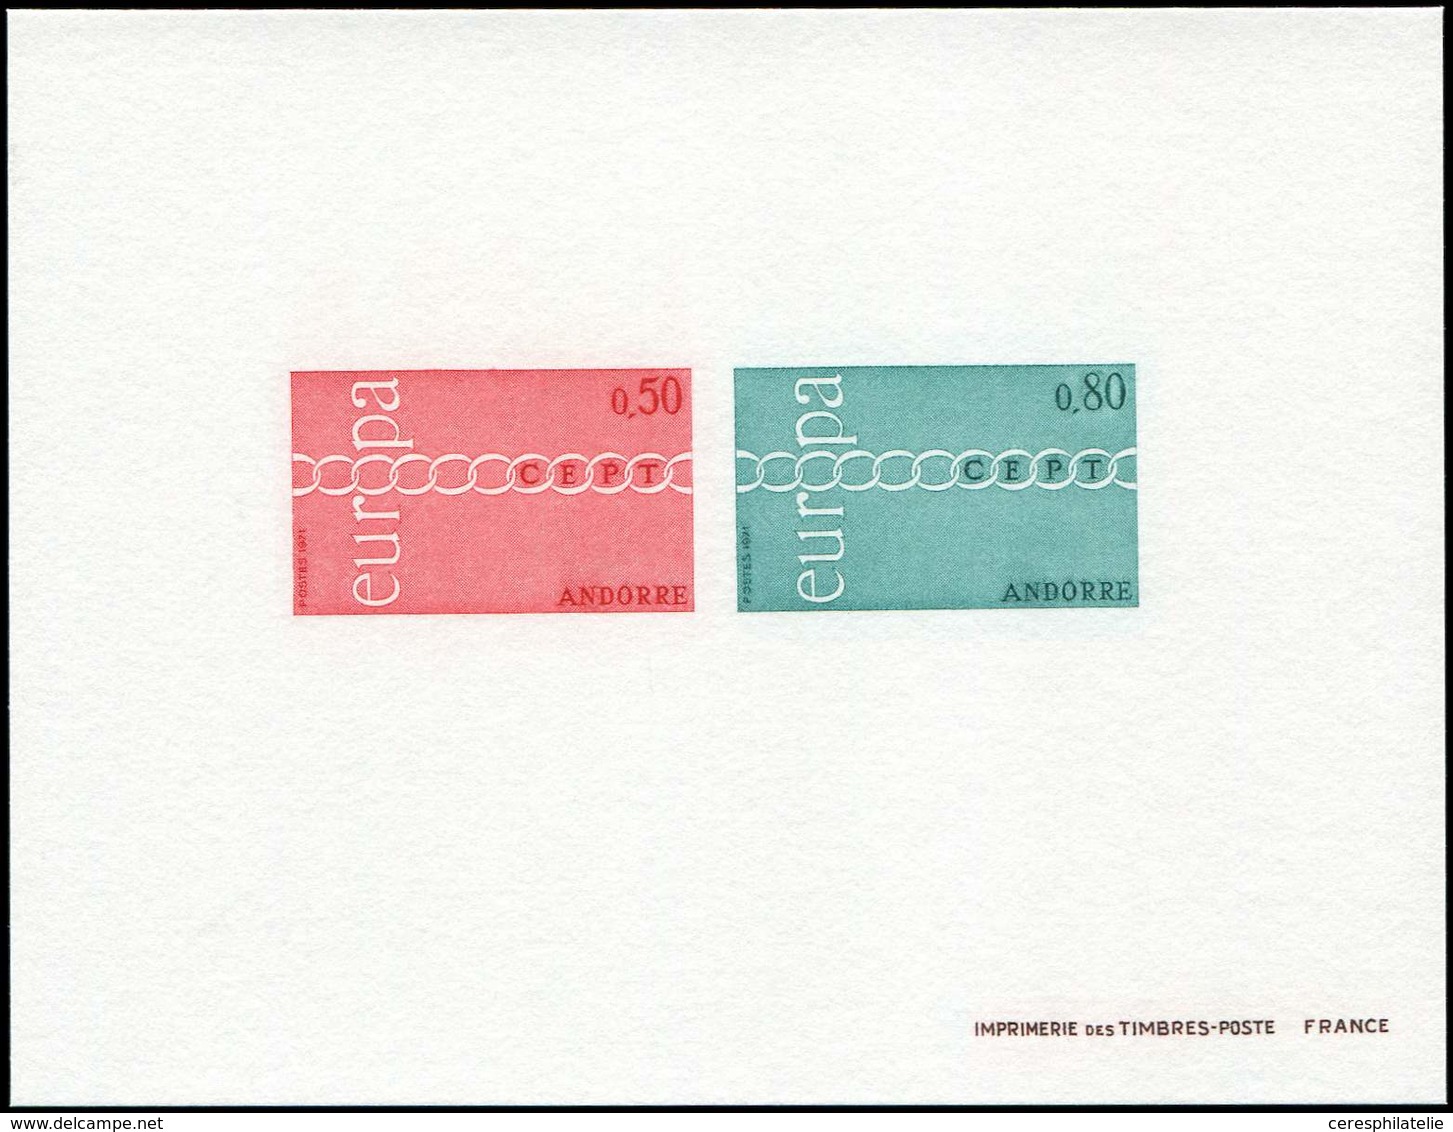 ANDORRE 212/13 : Europa 1971, épreuve Collective, TB - Used Stamps